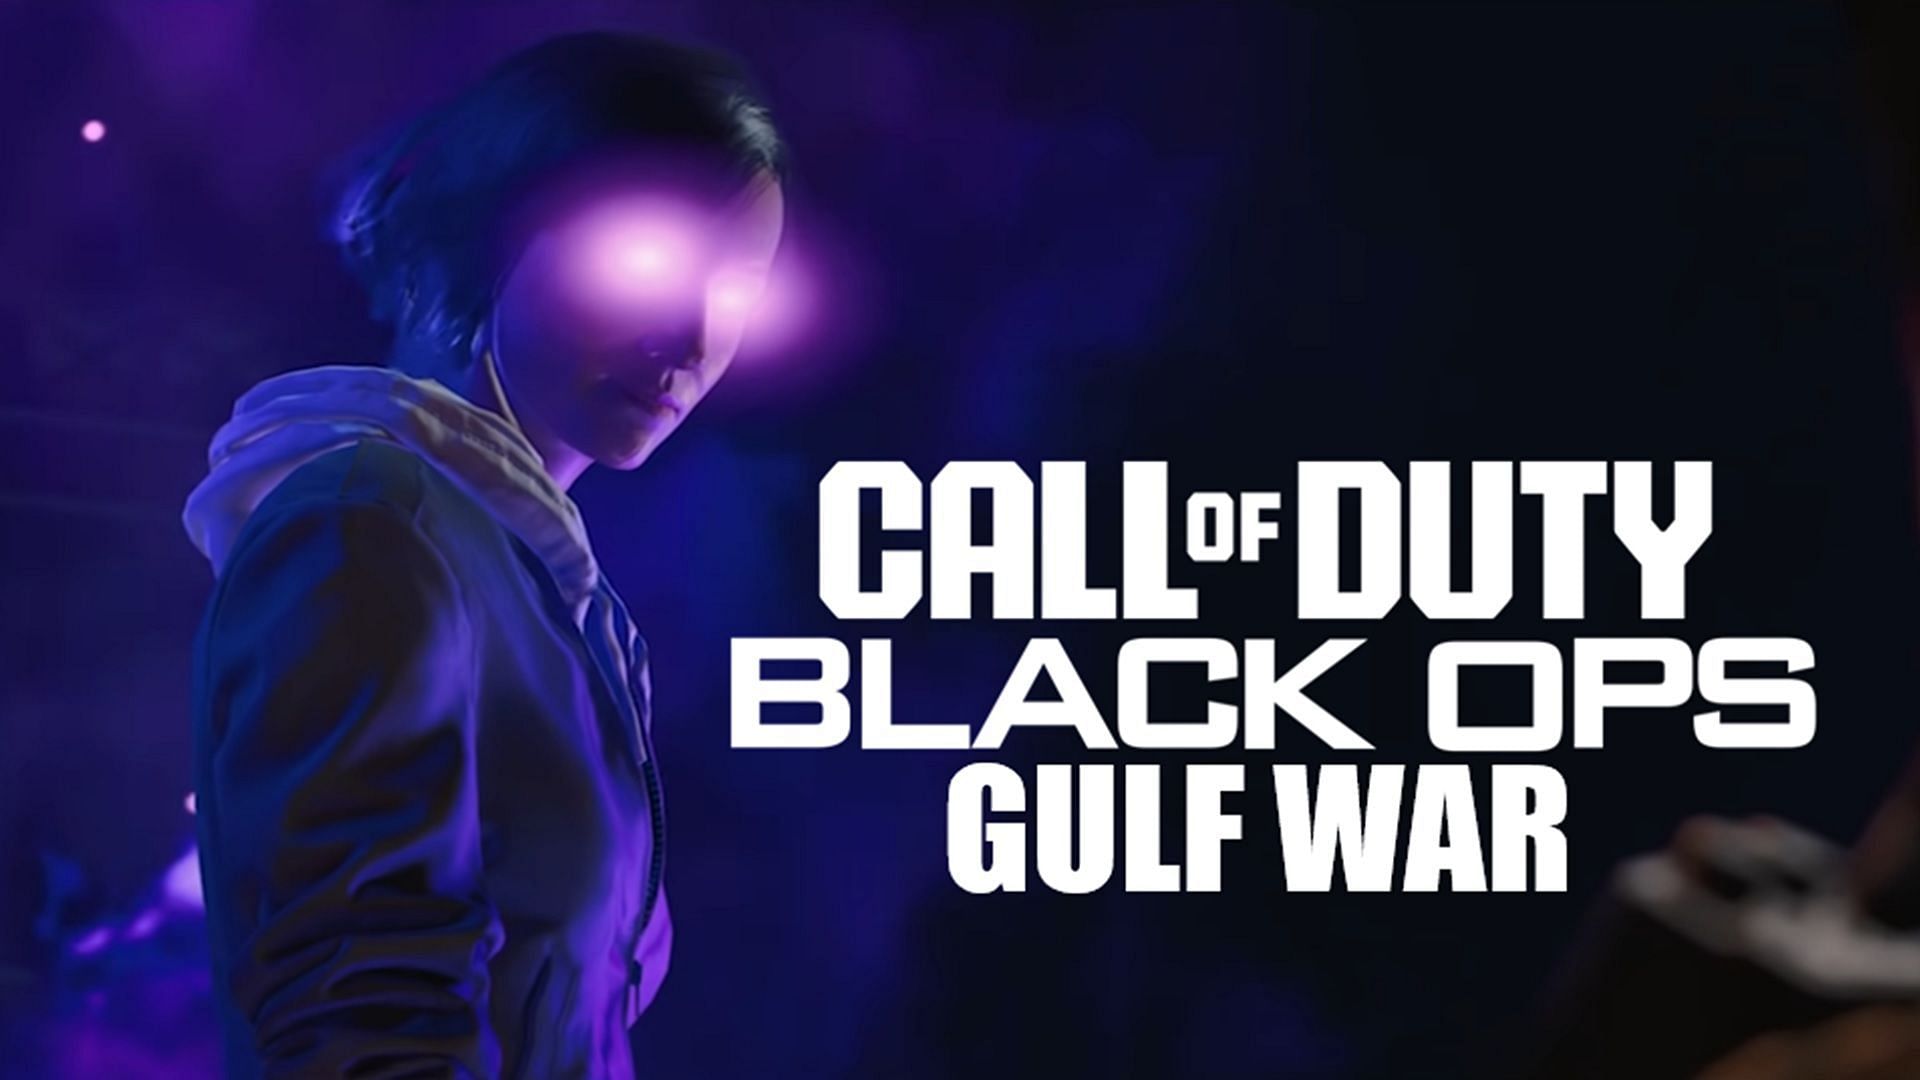 cod 2024 black ops gulf war may feature 4 round based zombies at launch